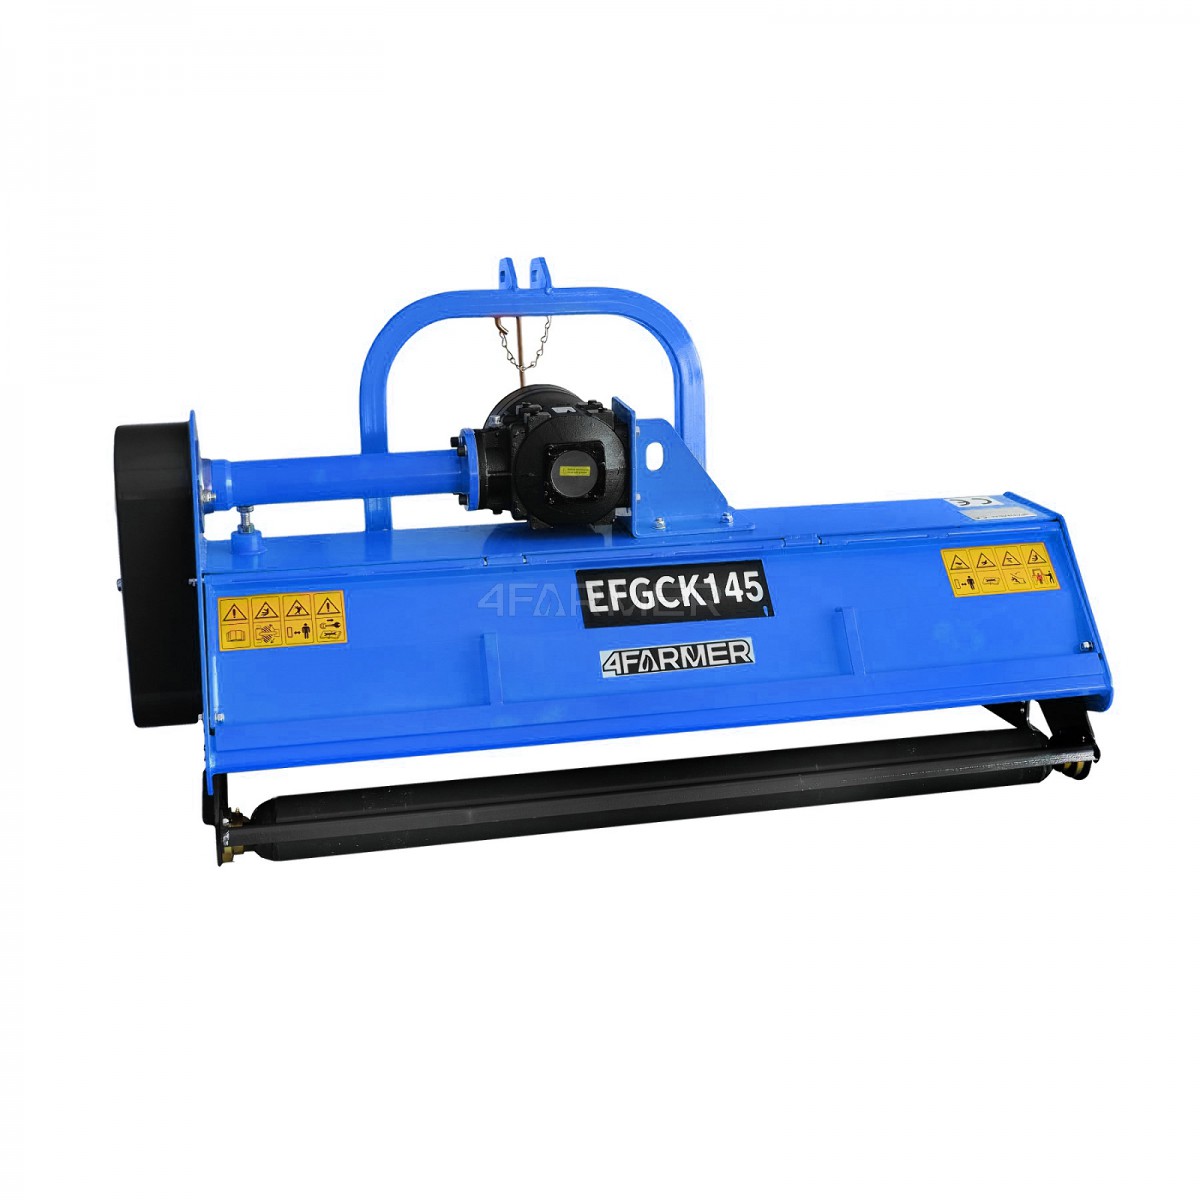 Flail mower EFGC-K 145 with opening flap 4FARMER - blue